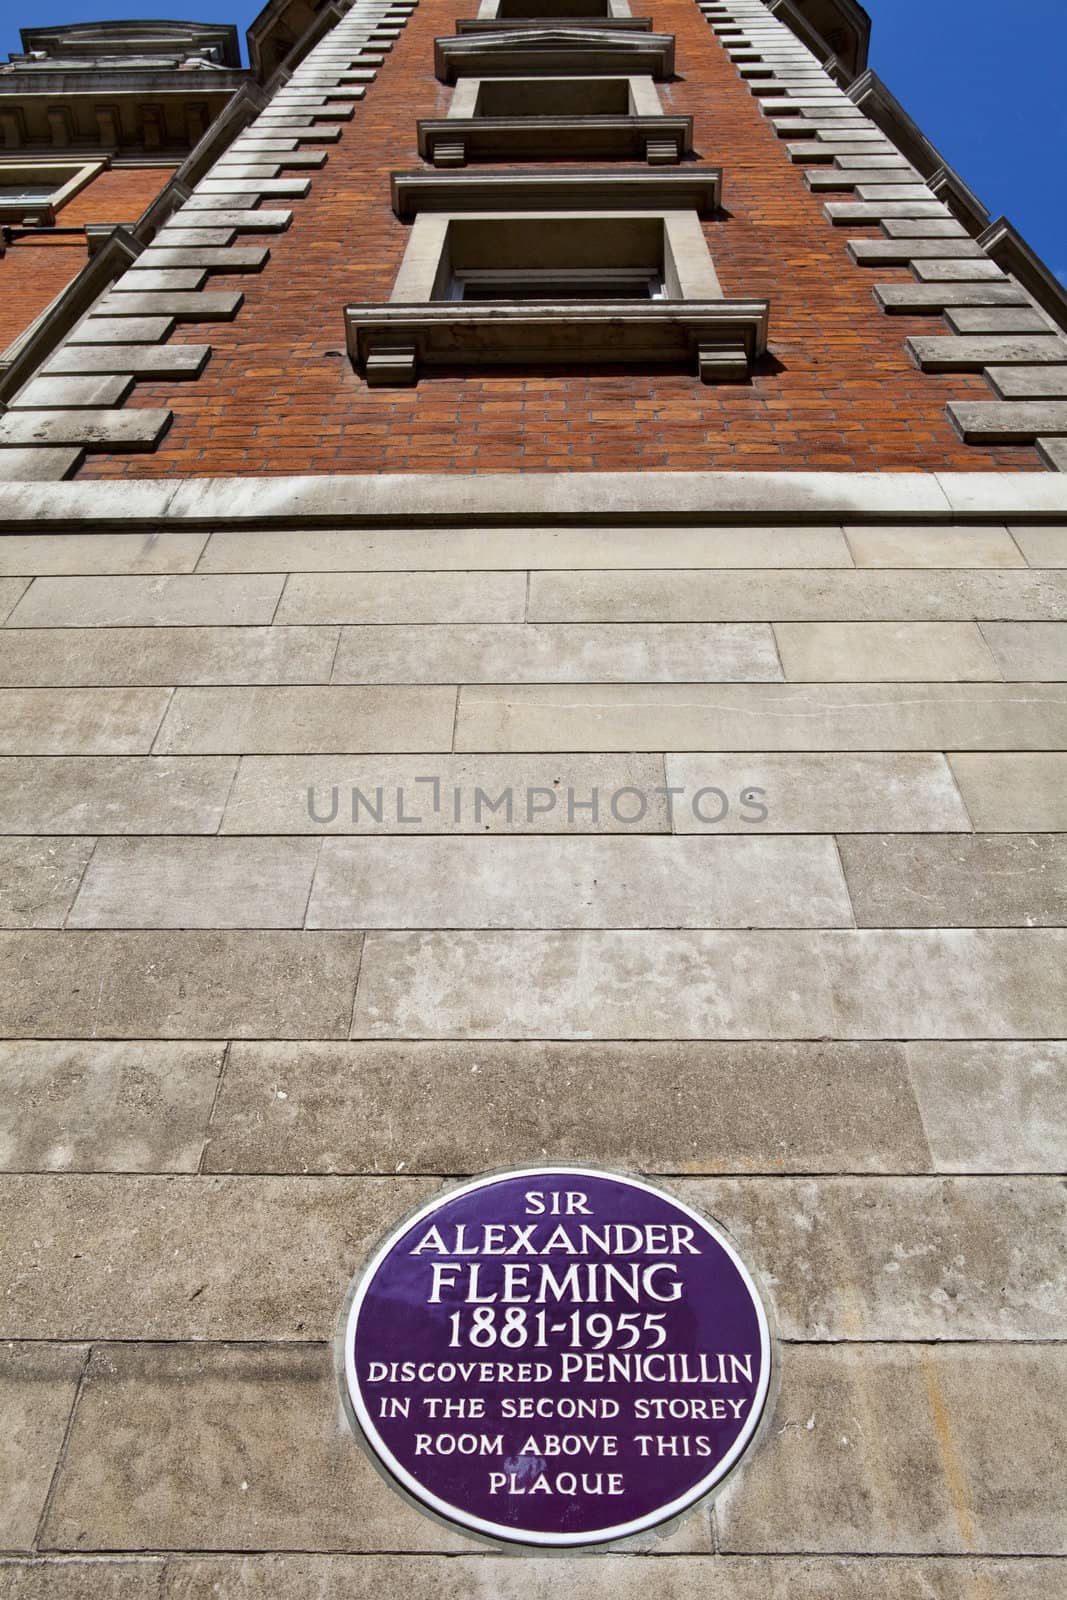 Sir Alexander Fleming Plaque at St. Mary's Hospital in London by chrisdorney